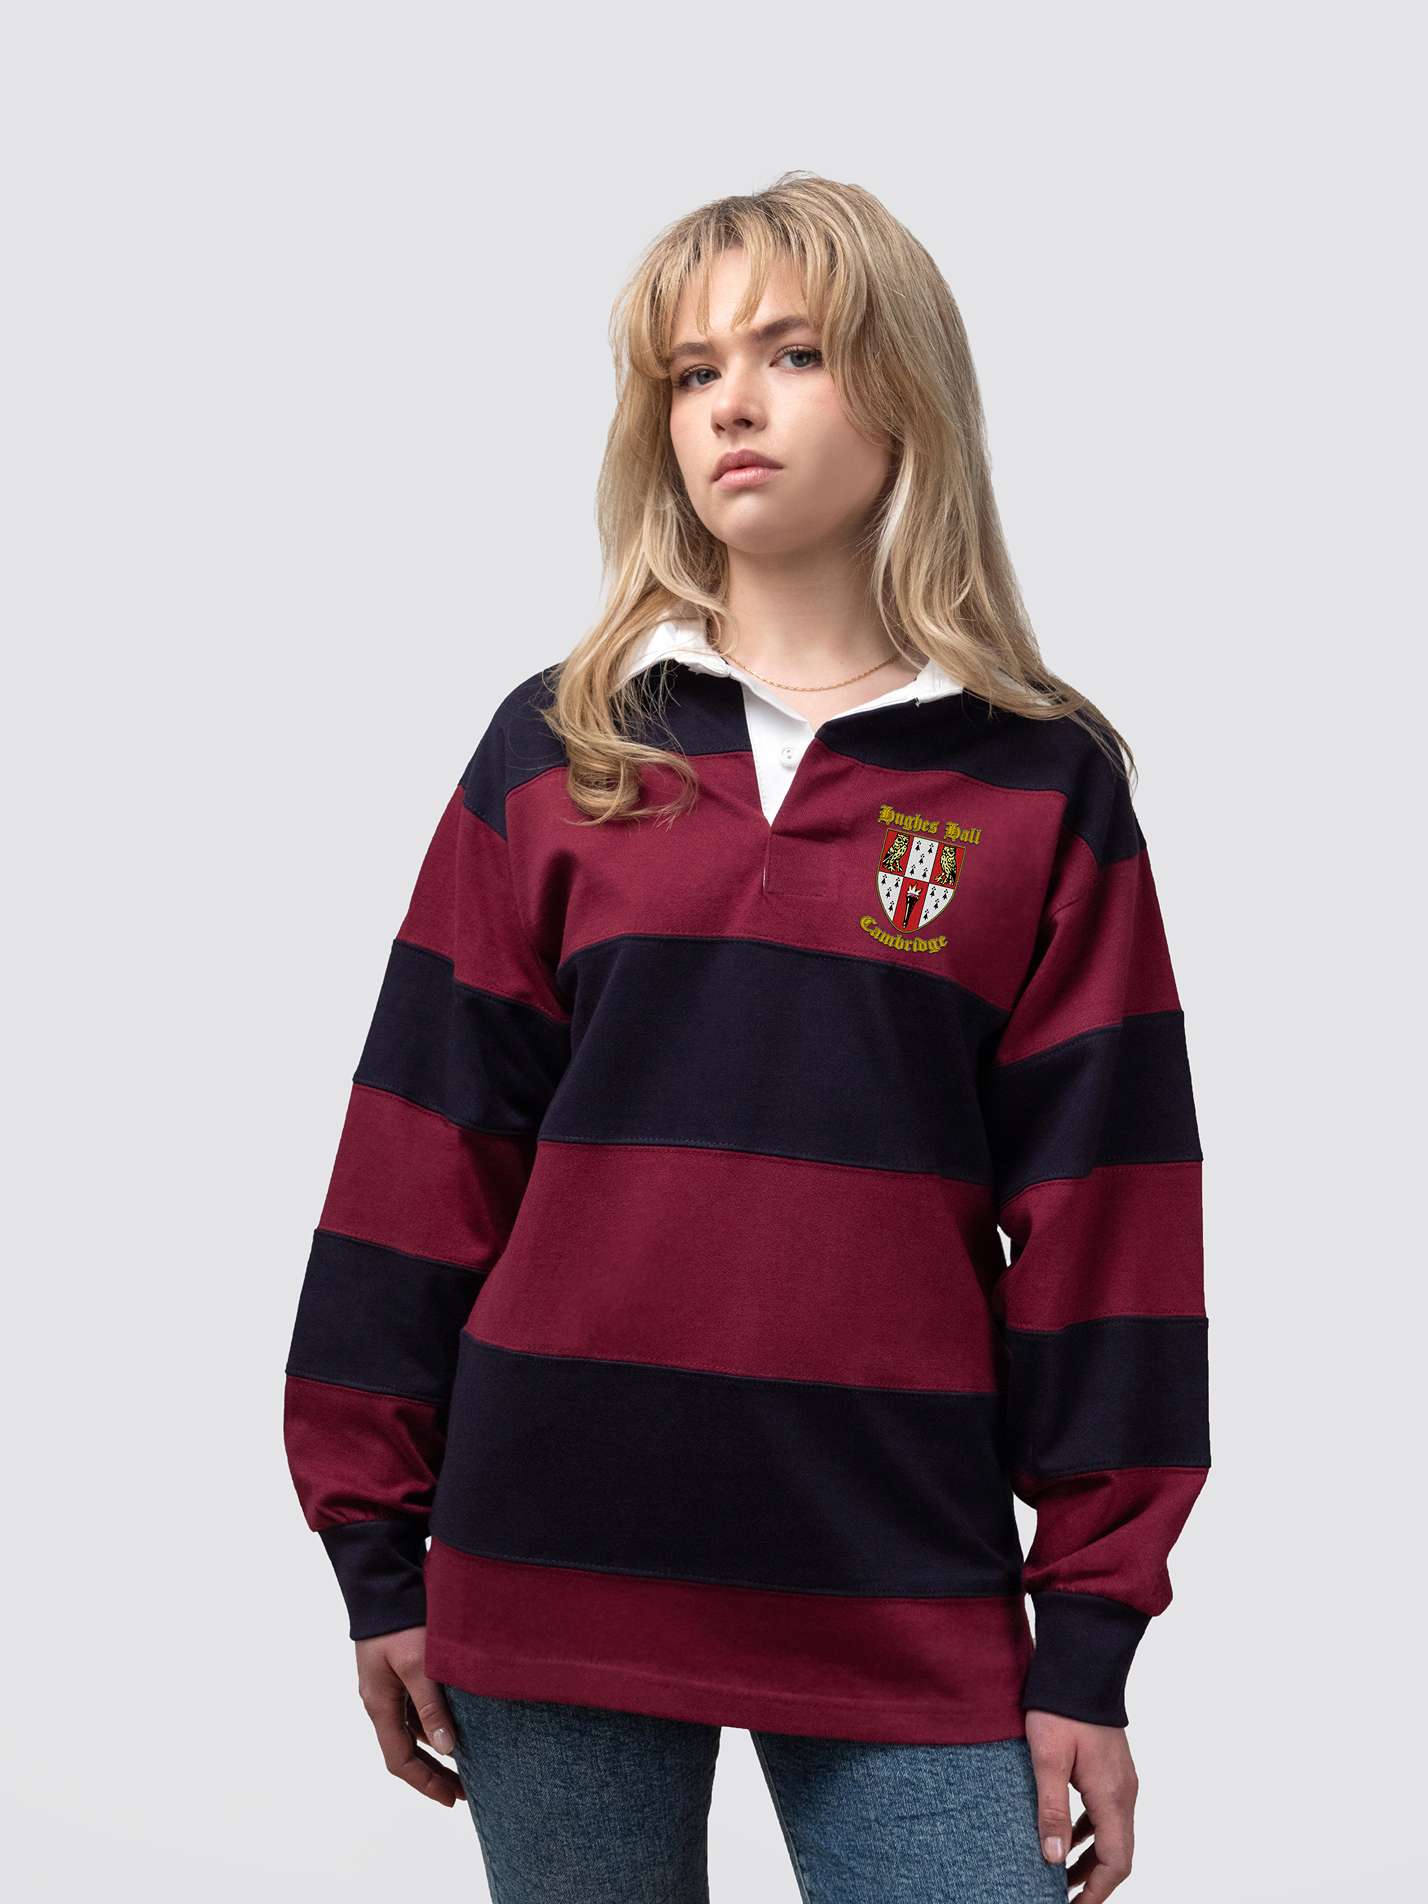 Hughes Hall College rugby shirt, with burgundy and navy stripes